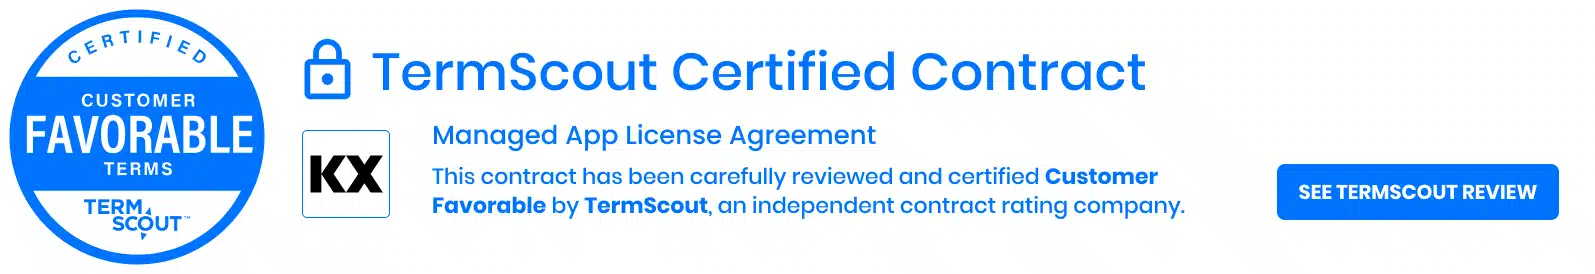 Teamscout Certified Contract